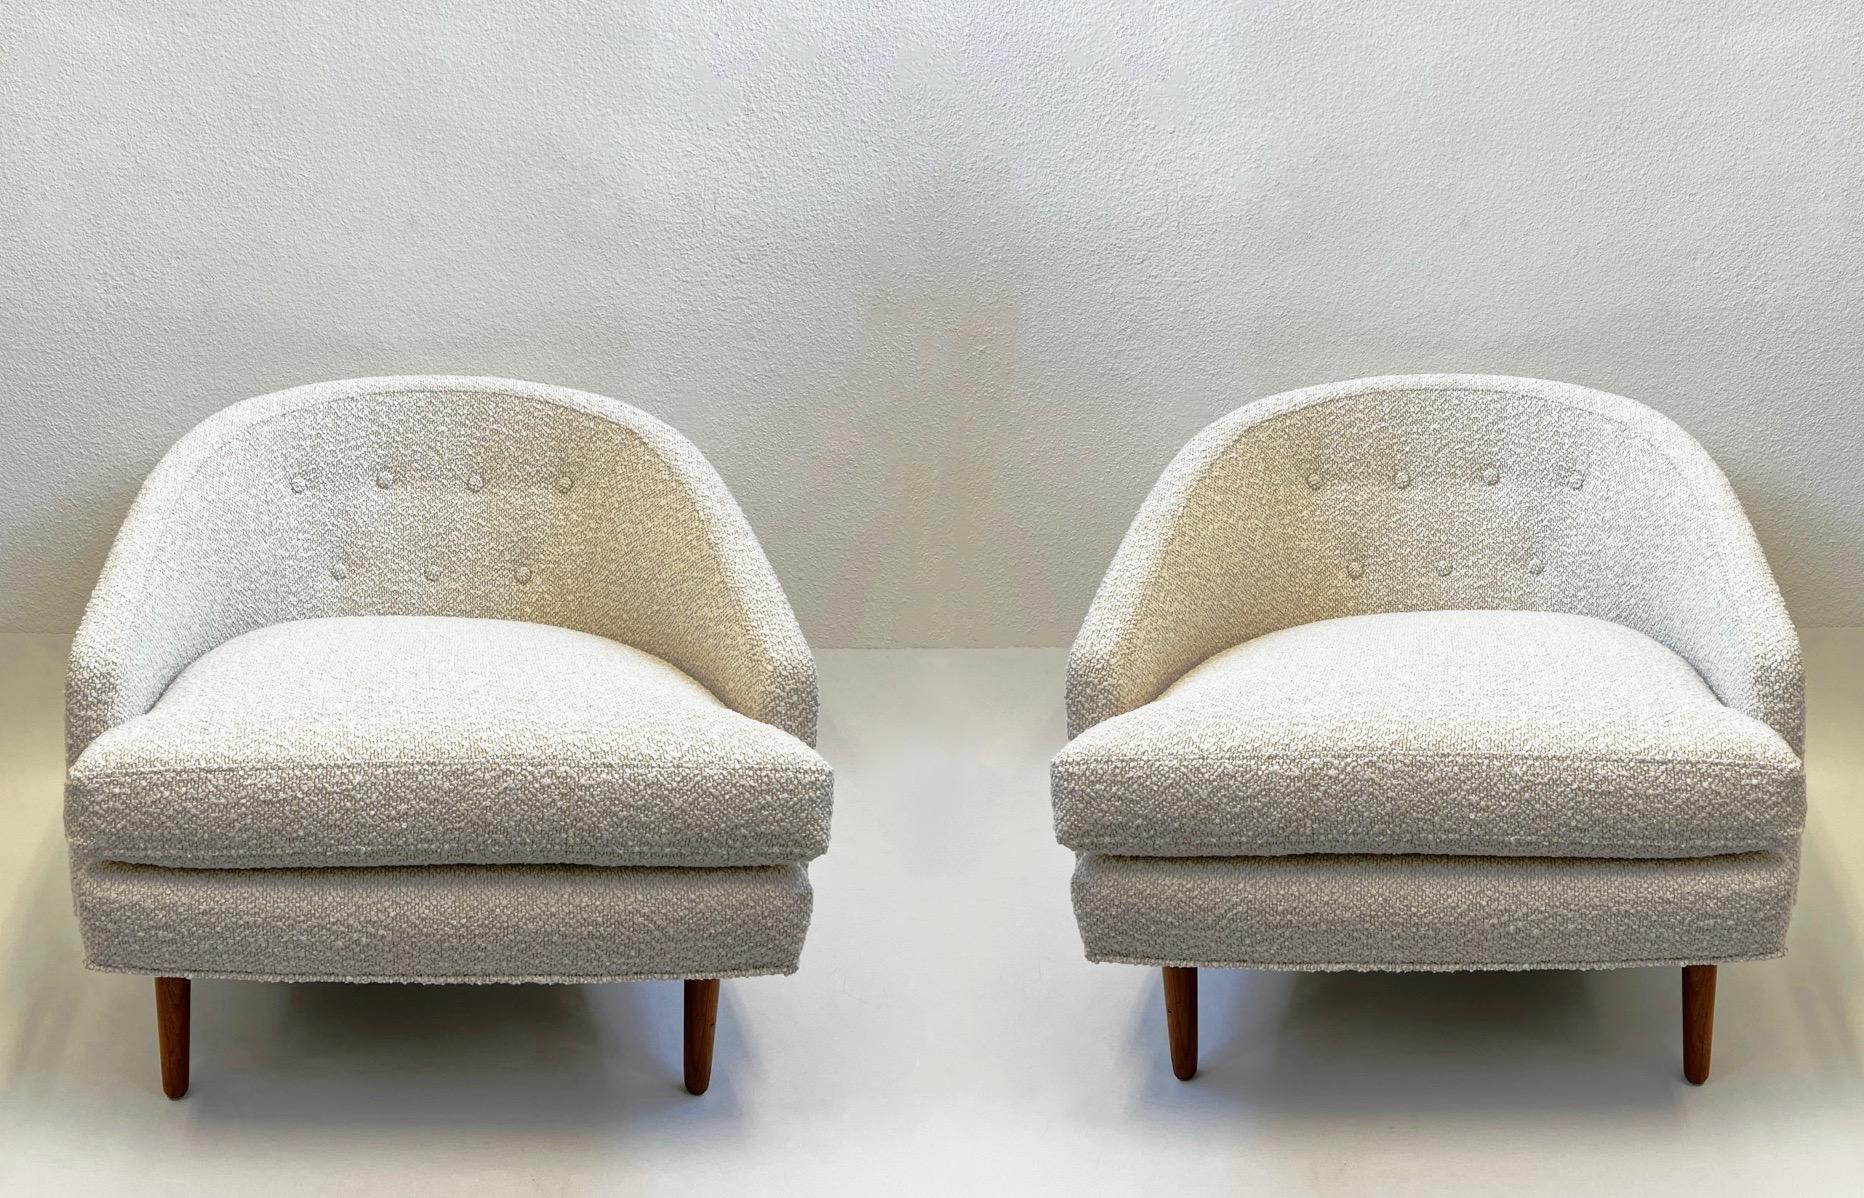 Glamorous pair of lounge chairs designed by Kipp Stewart in the 1960’s. 
Newly recovered with an off white fabric. The walnut legs are in original vintage condition, they show minor wear consistent with age. 

Measurements: 31” Deep, 29” Wide, 28”